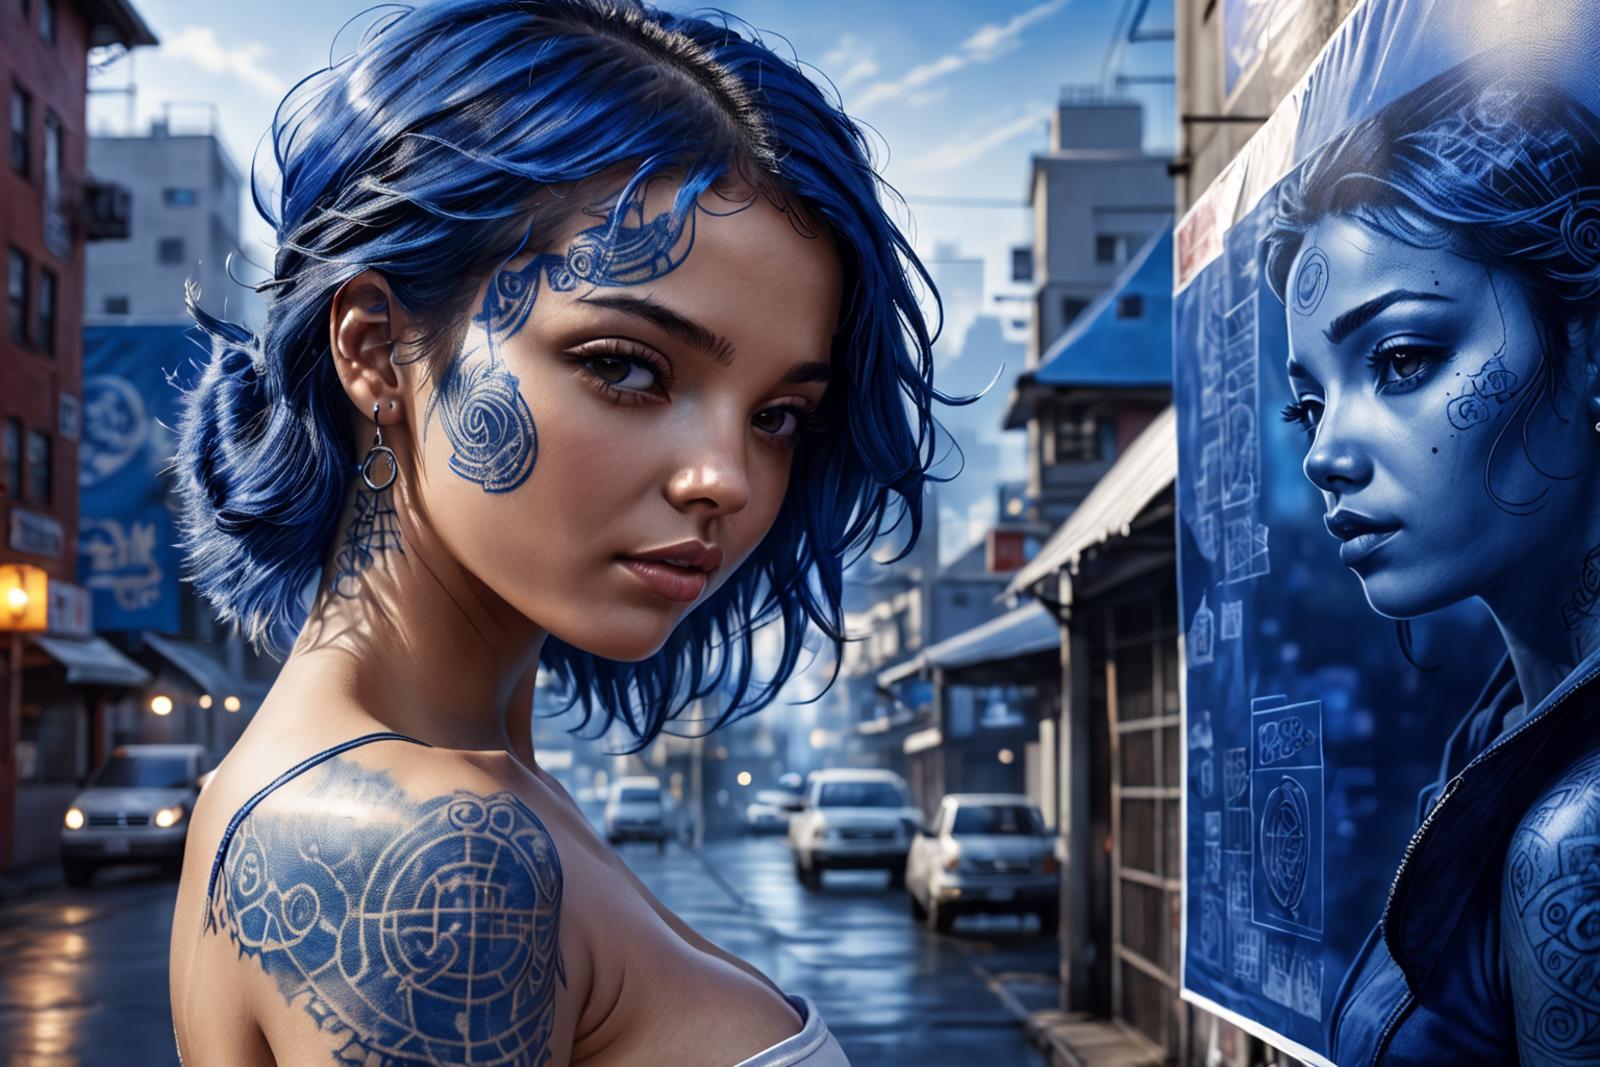 A blue-haired woman with tattoos looking at the camera in a city street.